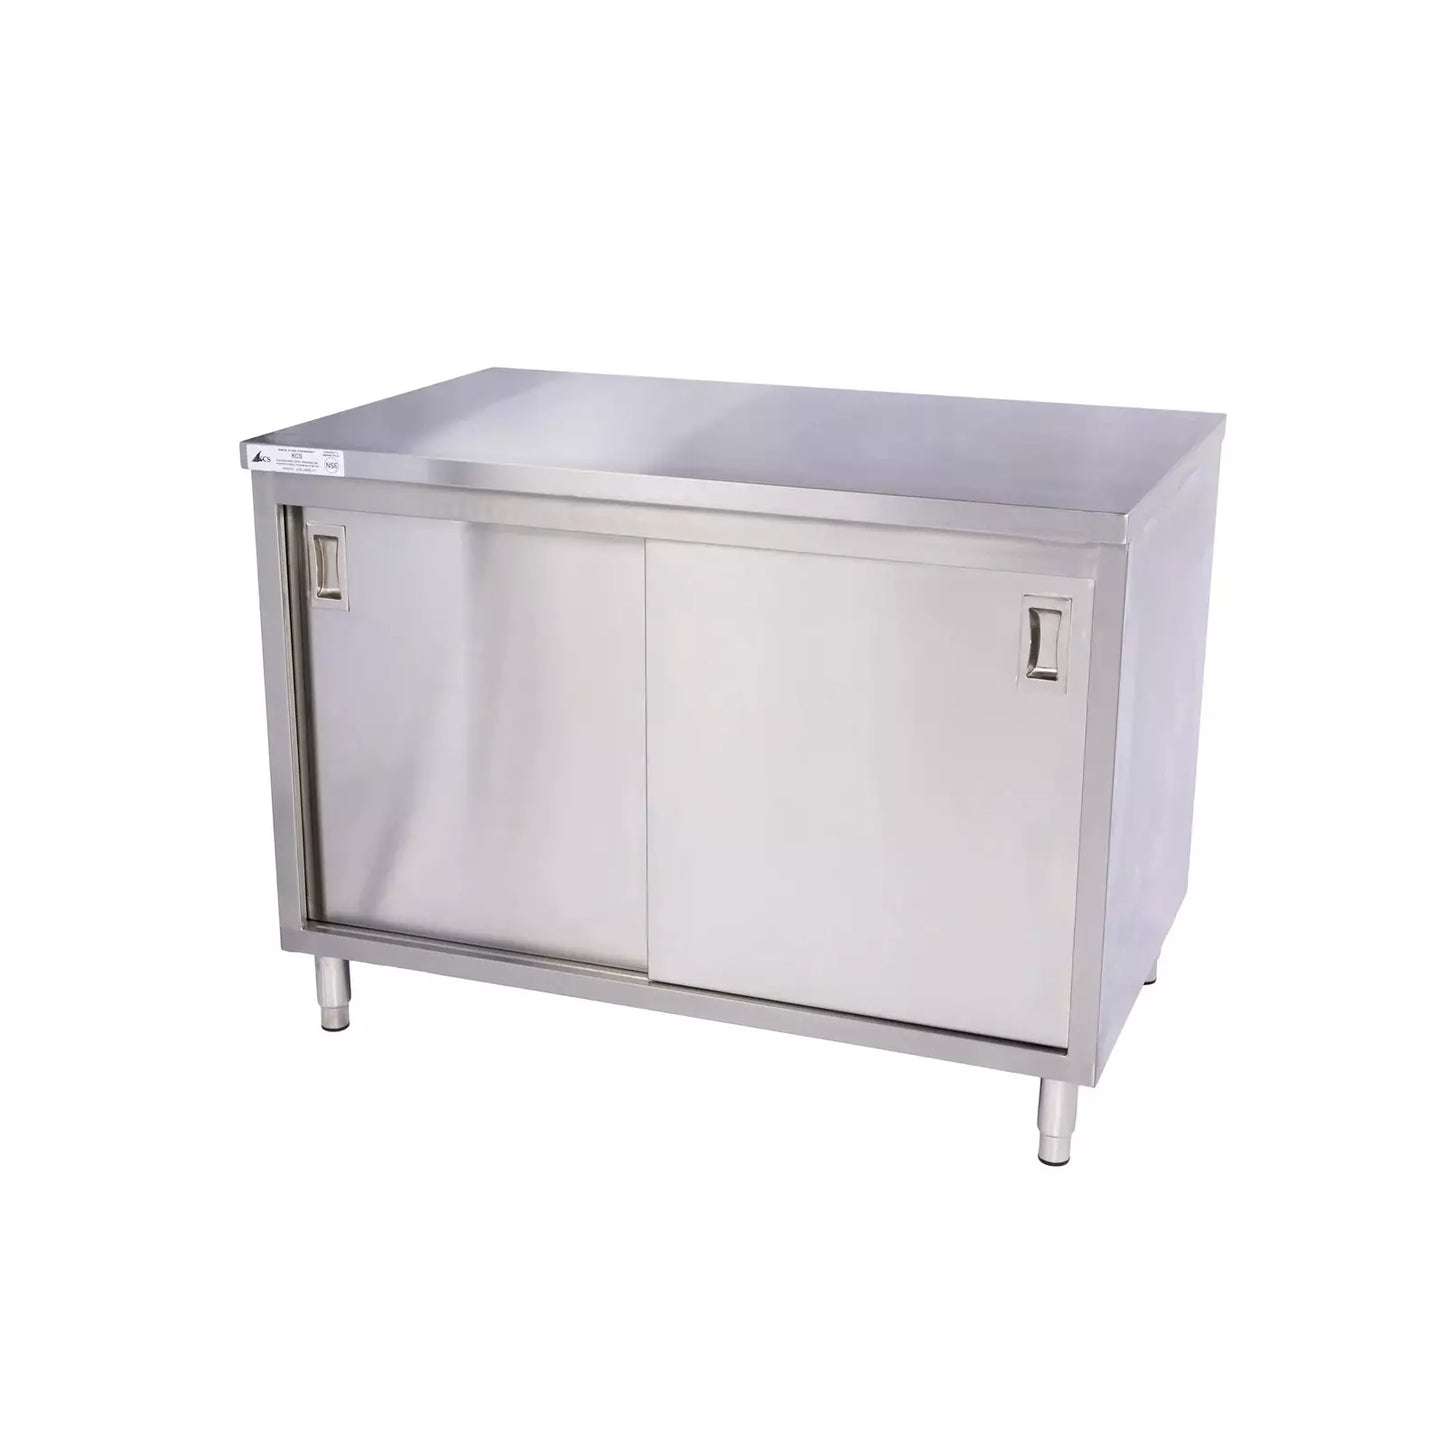 KCS CBS-2460 24" x 60" Stainless Steel Storage Welded Cabinet with 2 Sliding Doors